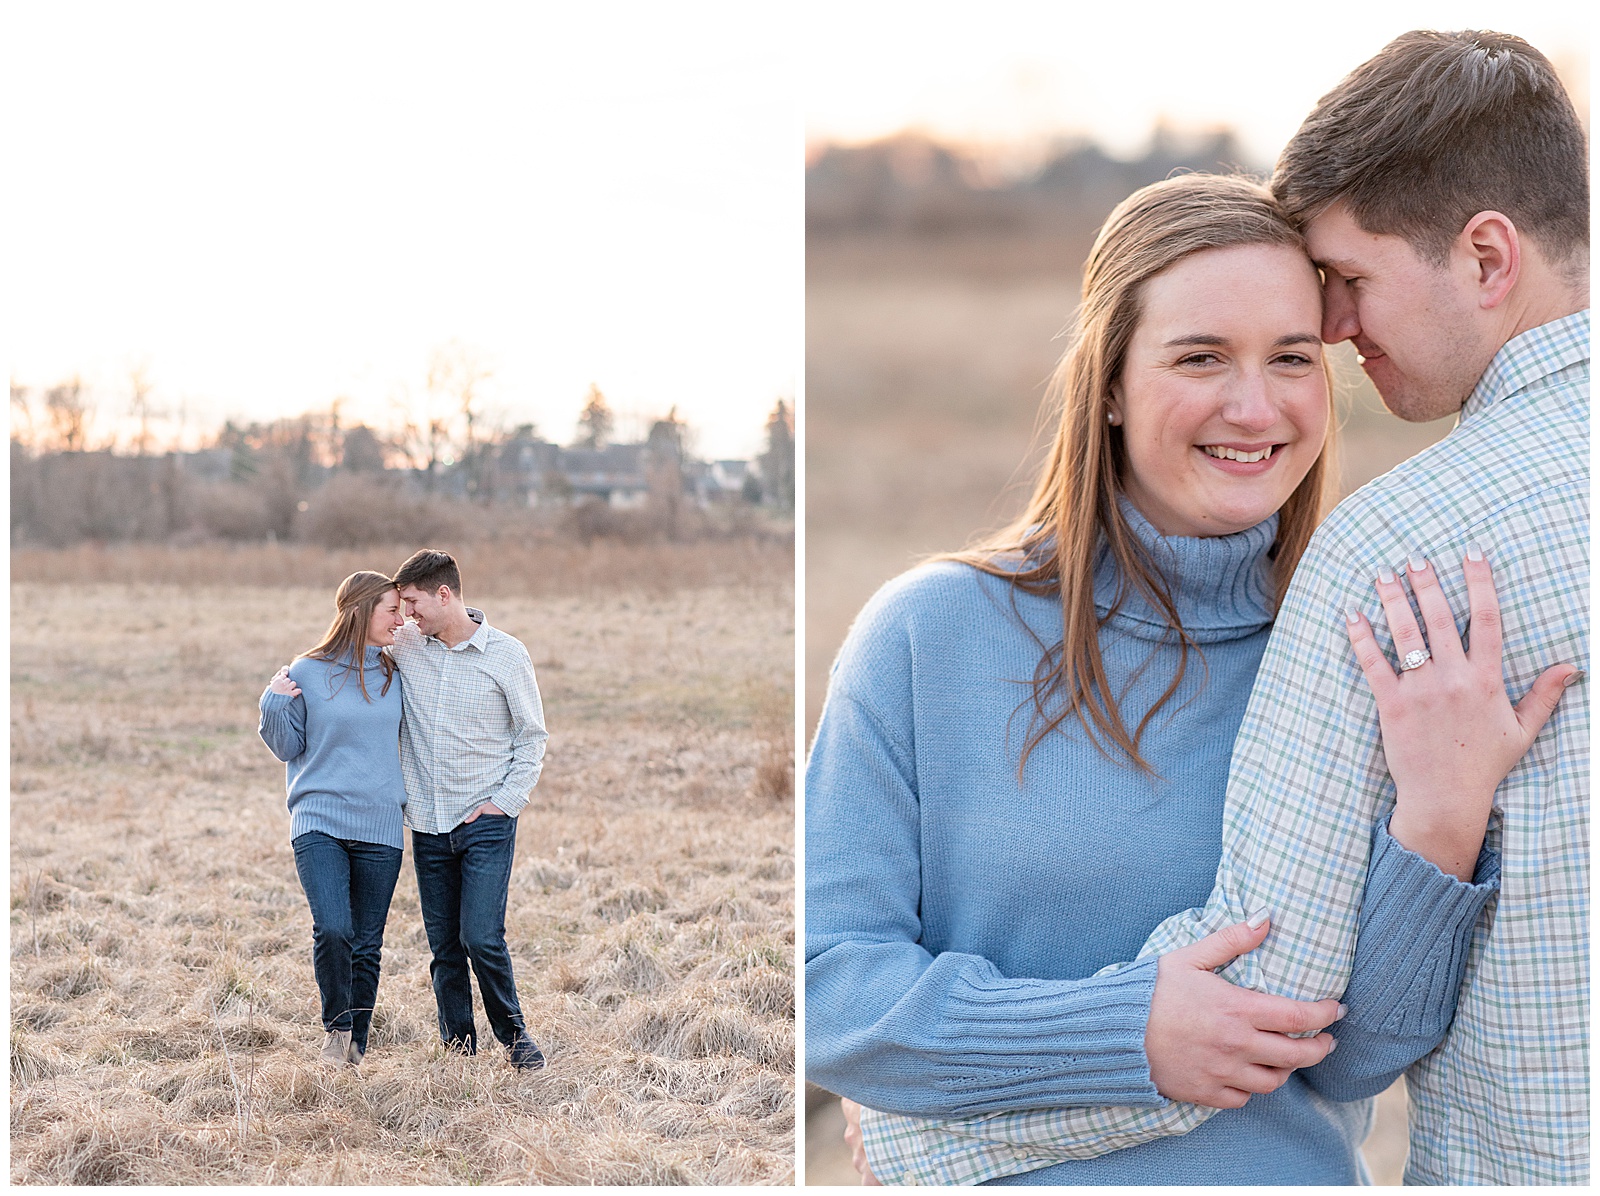 Engagement session photos at Overlook Park